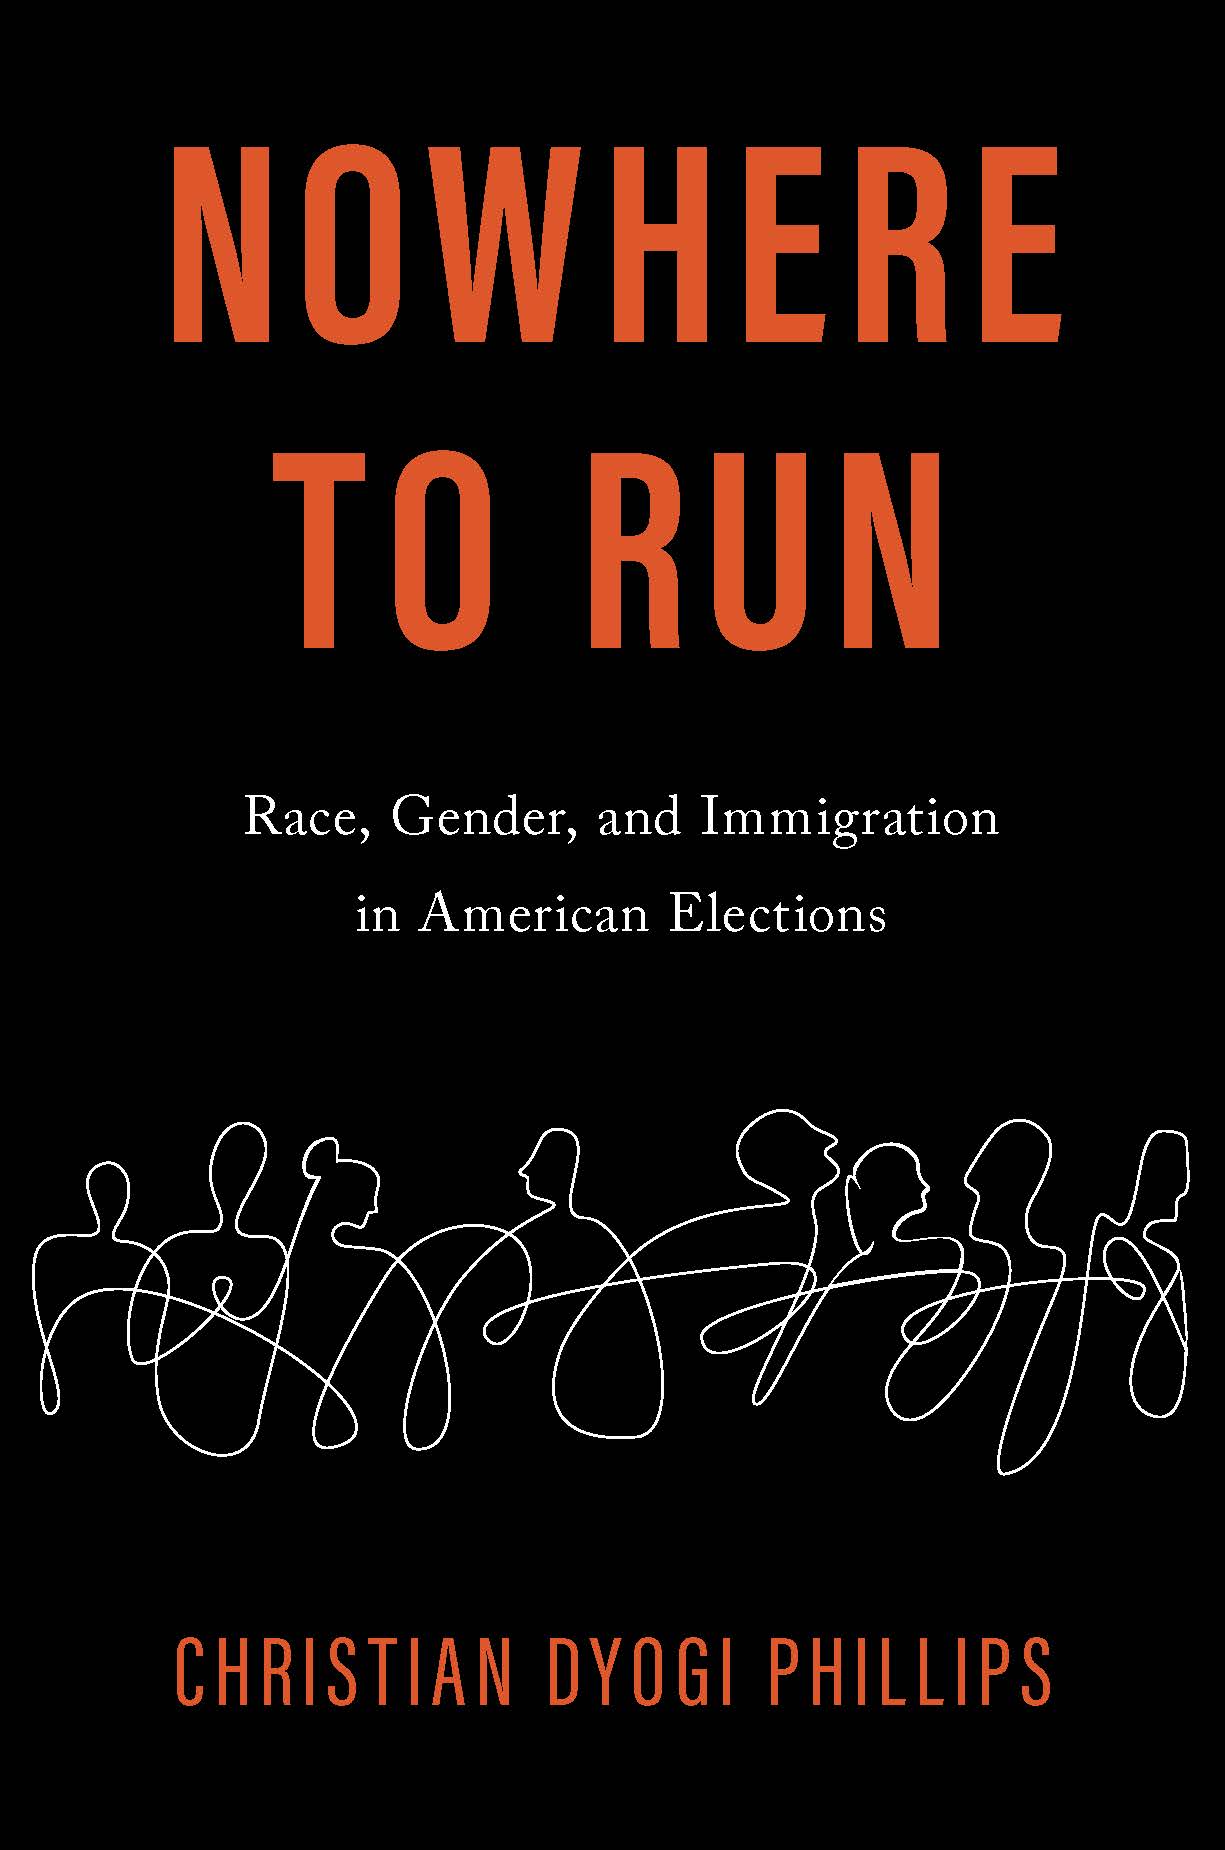 Nowhere to Run // Race, Gender, and Immigration in American Elections